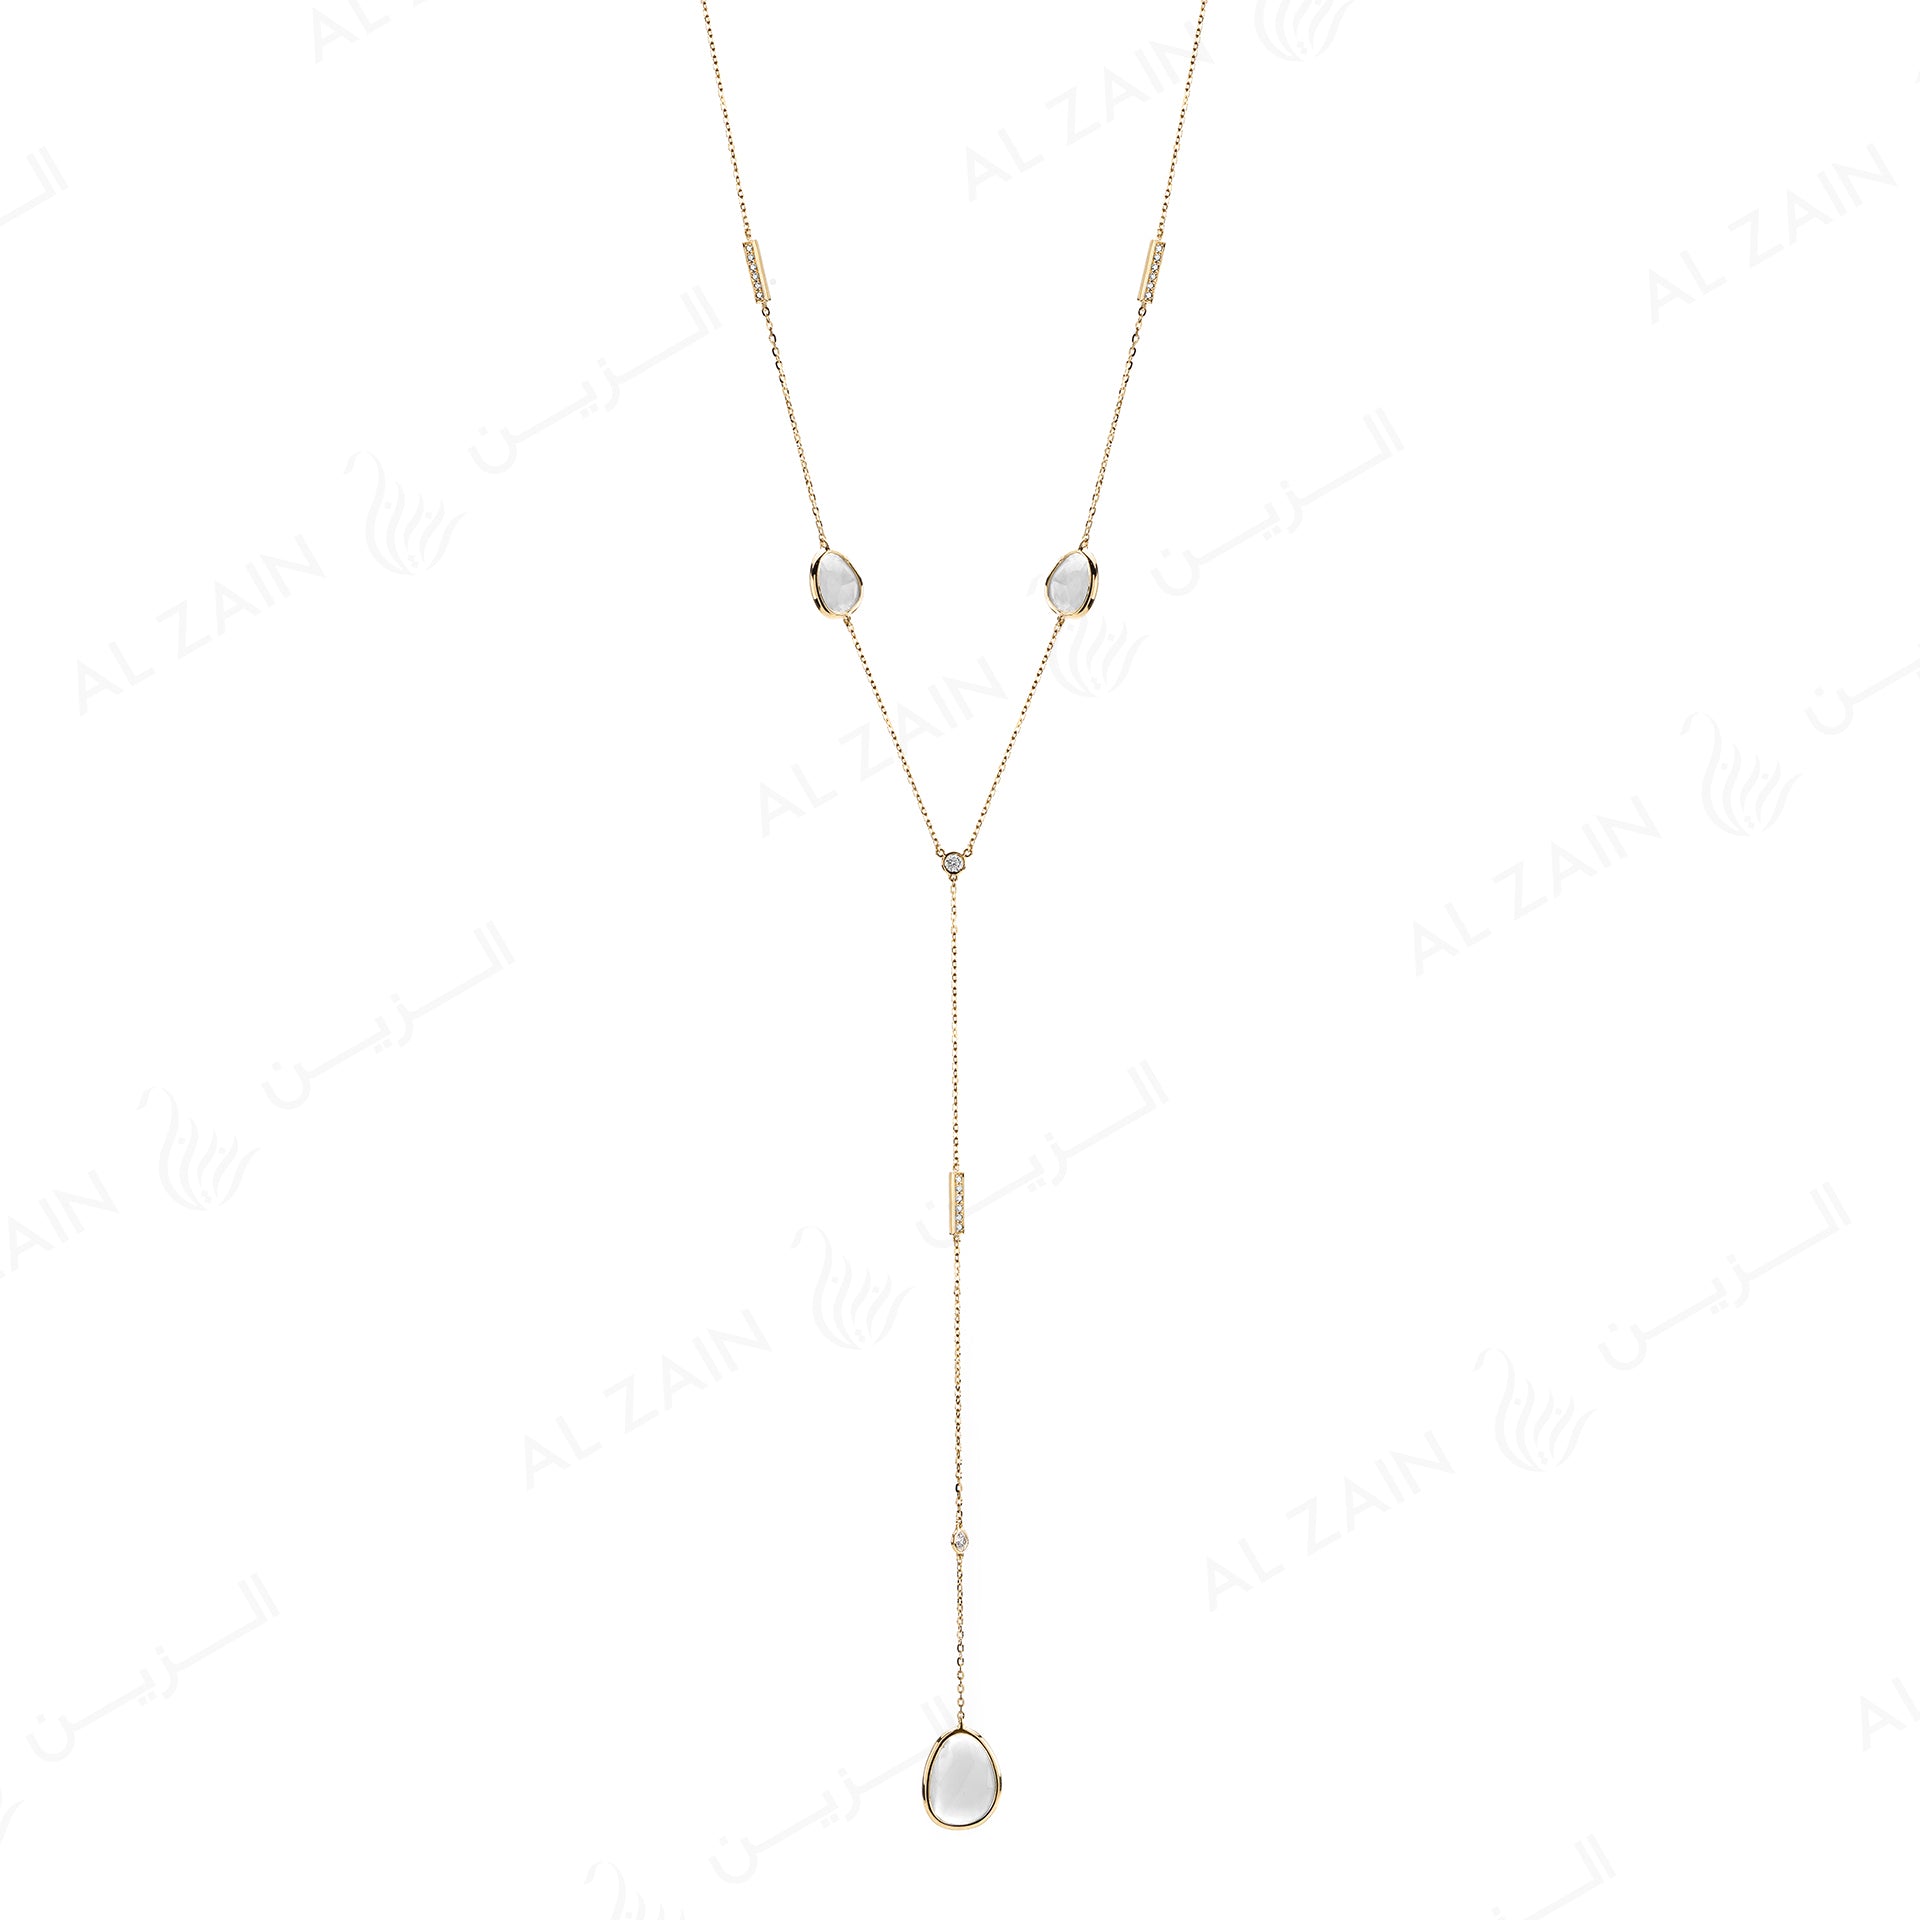 Simply Nina necklace in 18k yellow gold with Mother of Pearl stones and diamonds